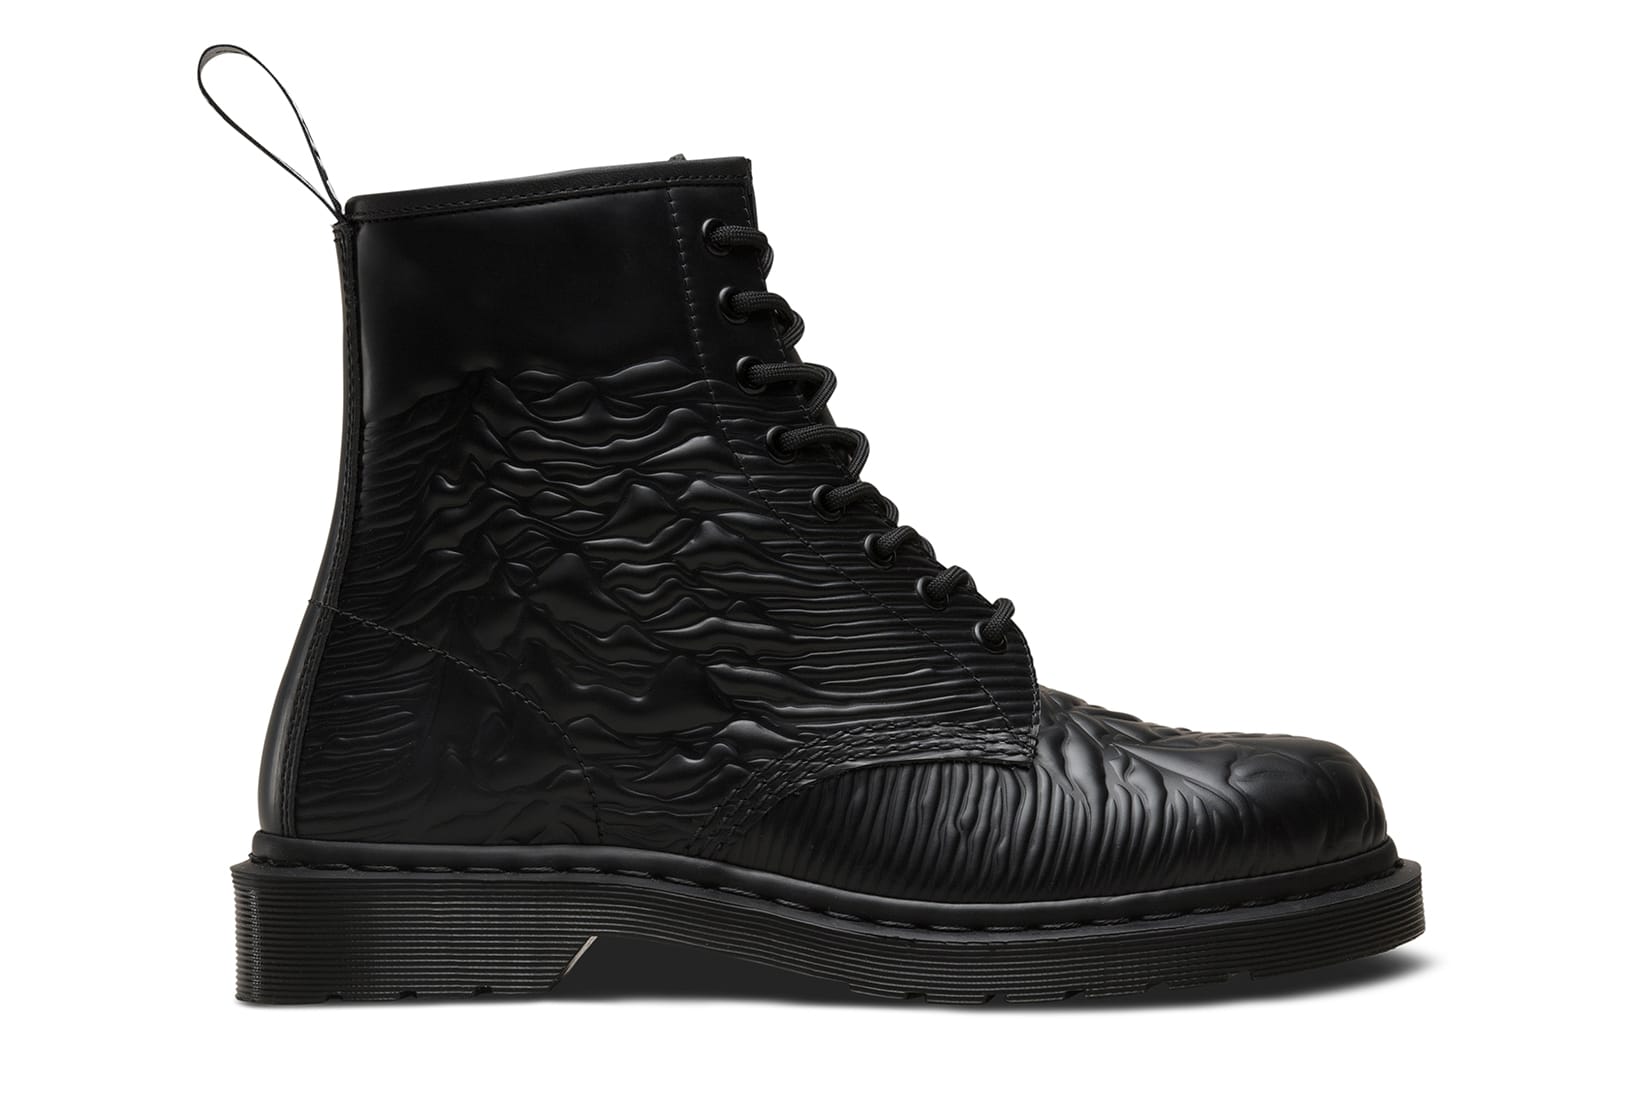 Dr. Martens x Joy Division/New Order Collab | Hypebeast